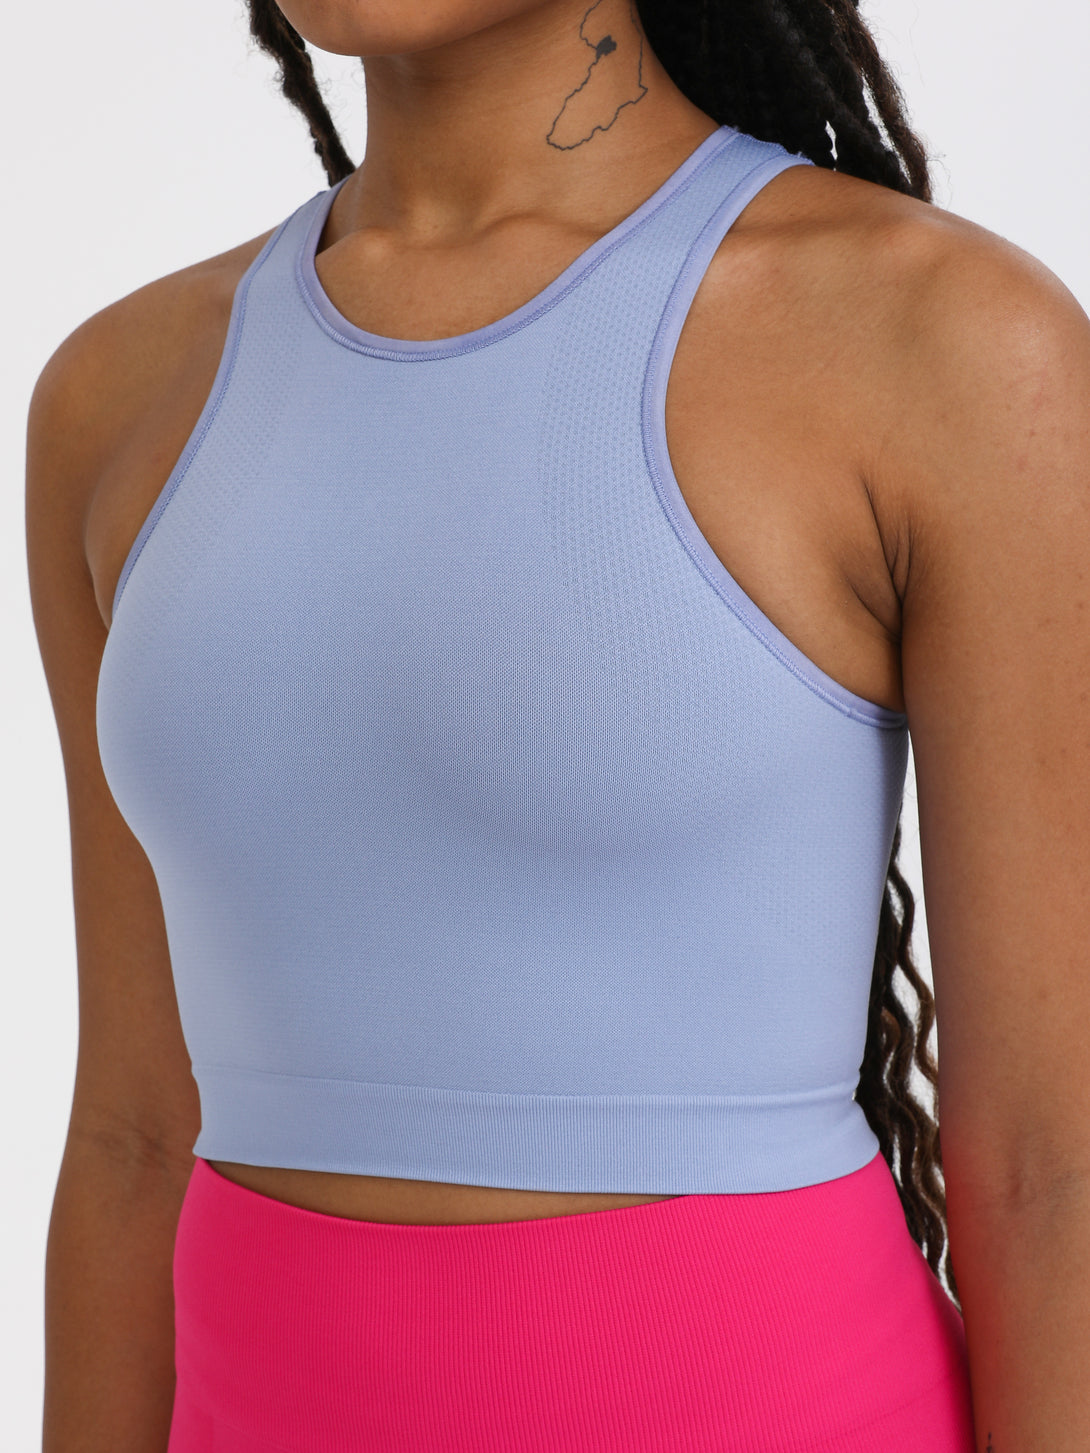 A Woman Wearing Purple Impression Color All-Day Seamless Sleeveless Crop Top